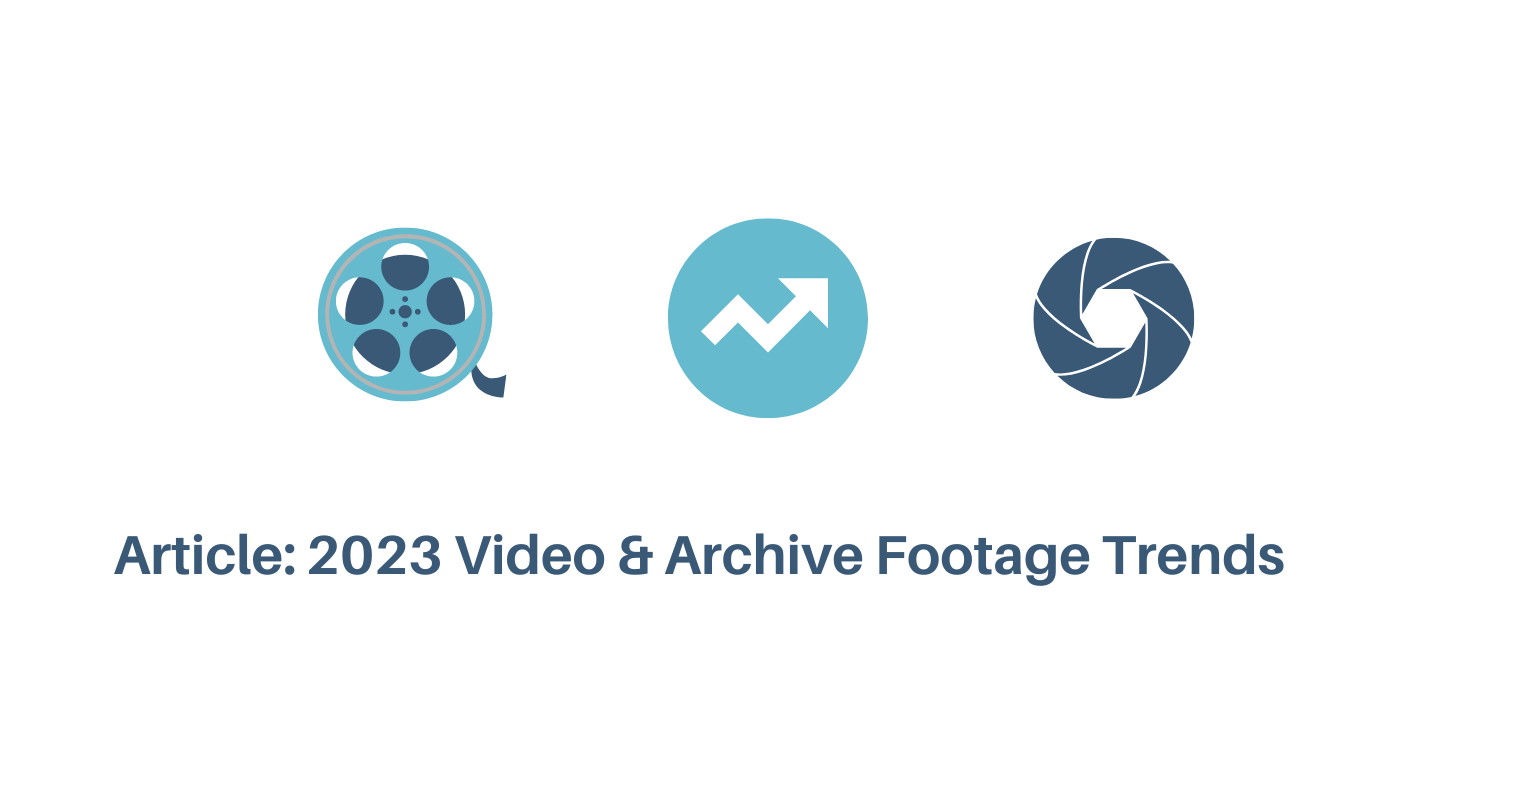 ARTICLE:  2023 VIDEO AND ARCHIVE FOOTAGE TRENDS